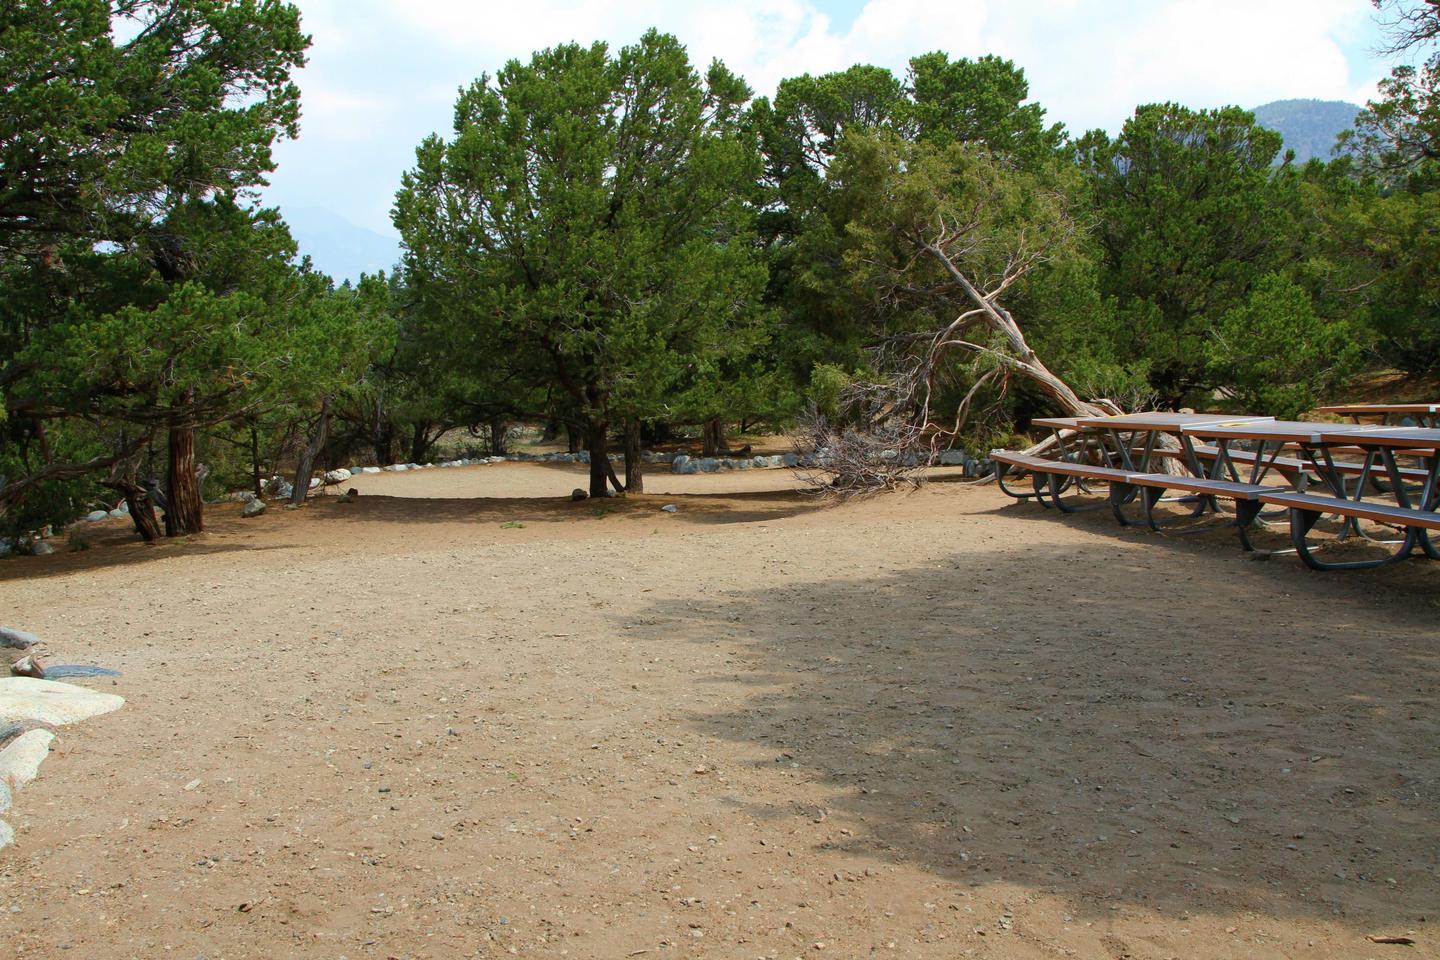 Another view from inside Group Site "A" tent area. A line of picnic tables is on the right.Group Site A, Pinon Flats Campground